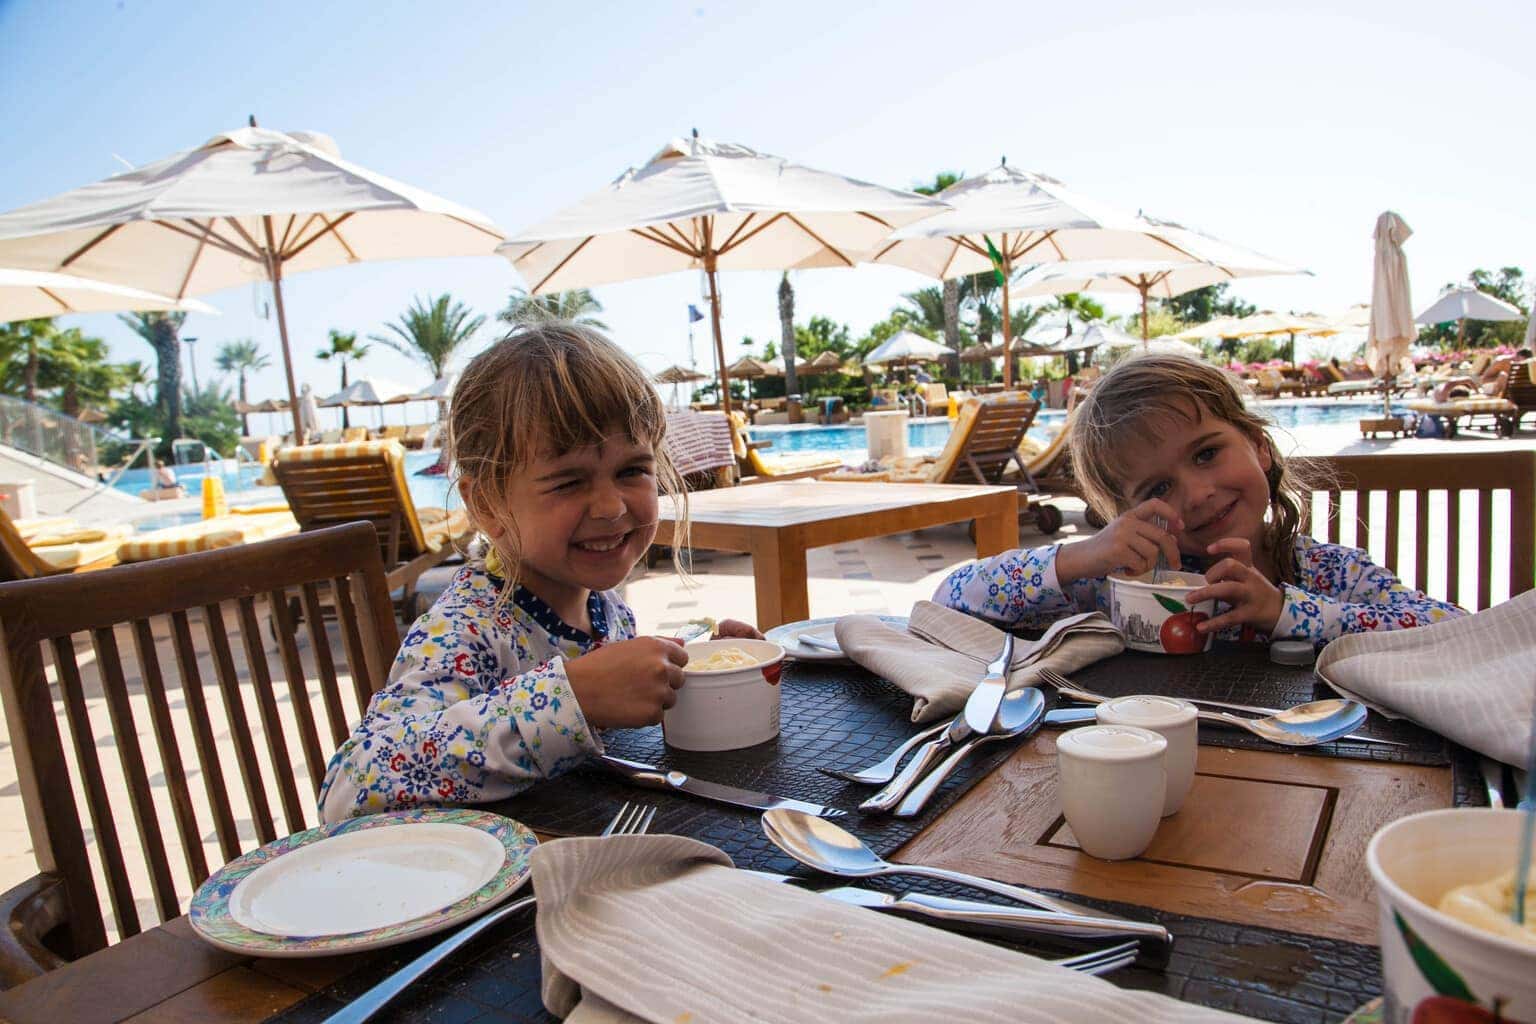 Four Seasons Limassol, Cyprus for a 5 * Family Holiday www.minitravellers.co.uk